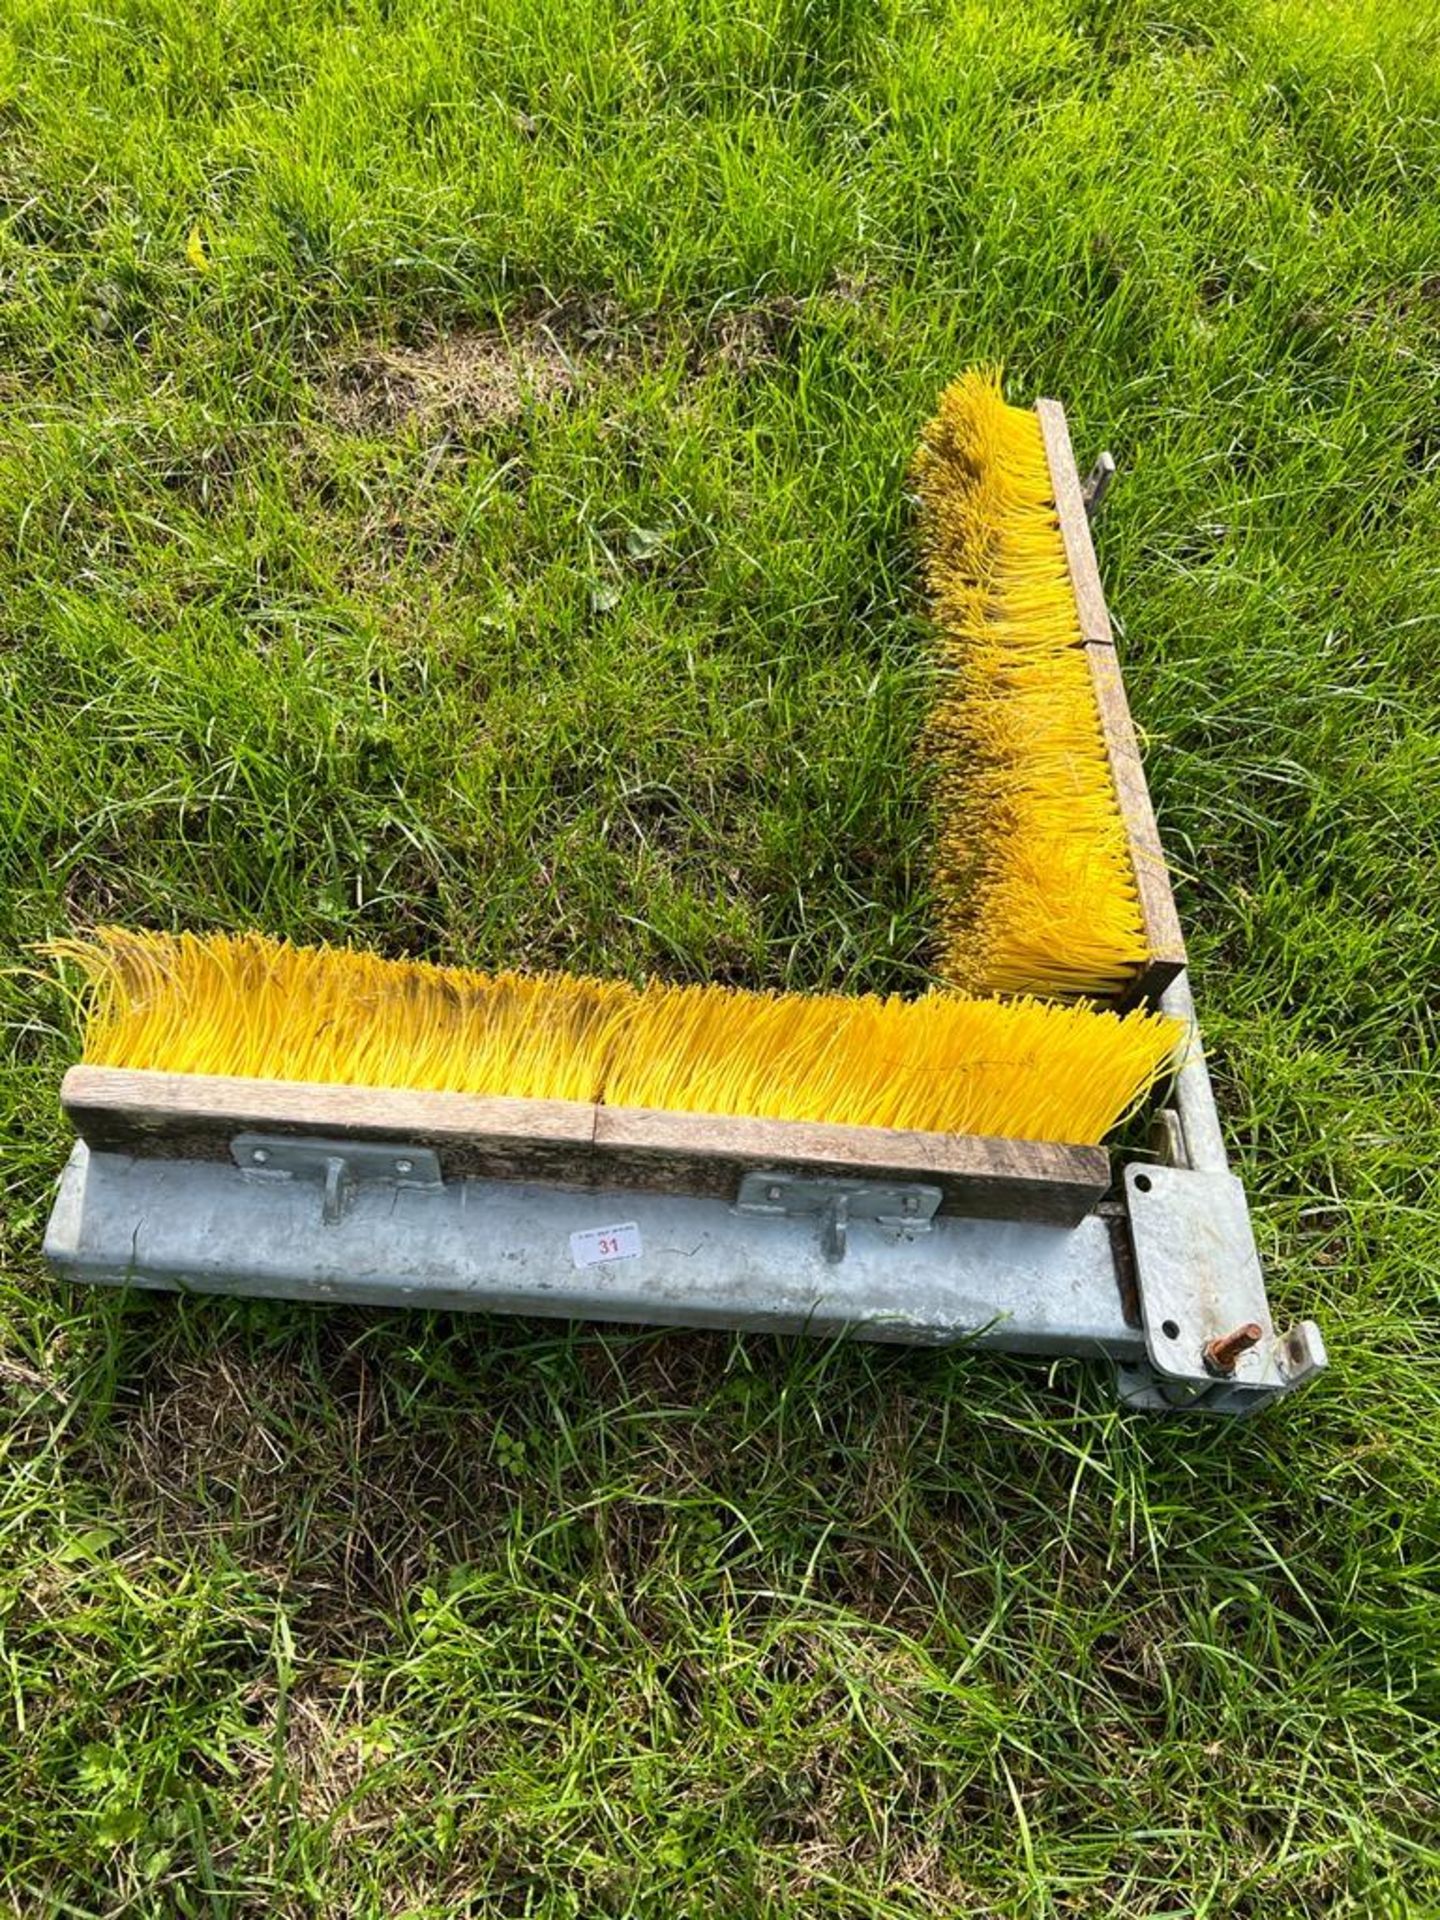 A COW BRUSH